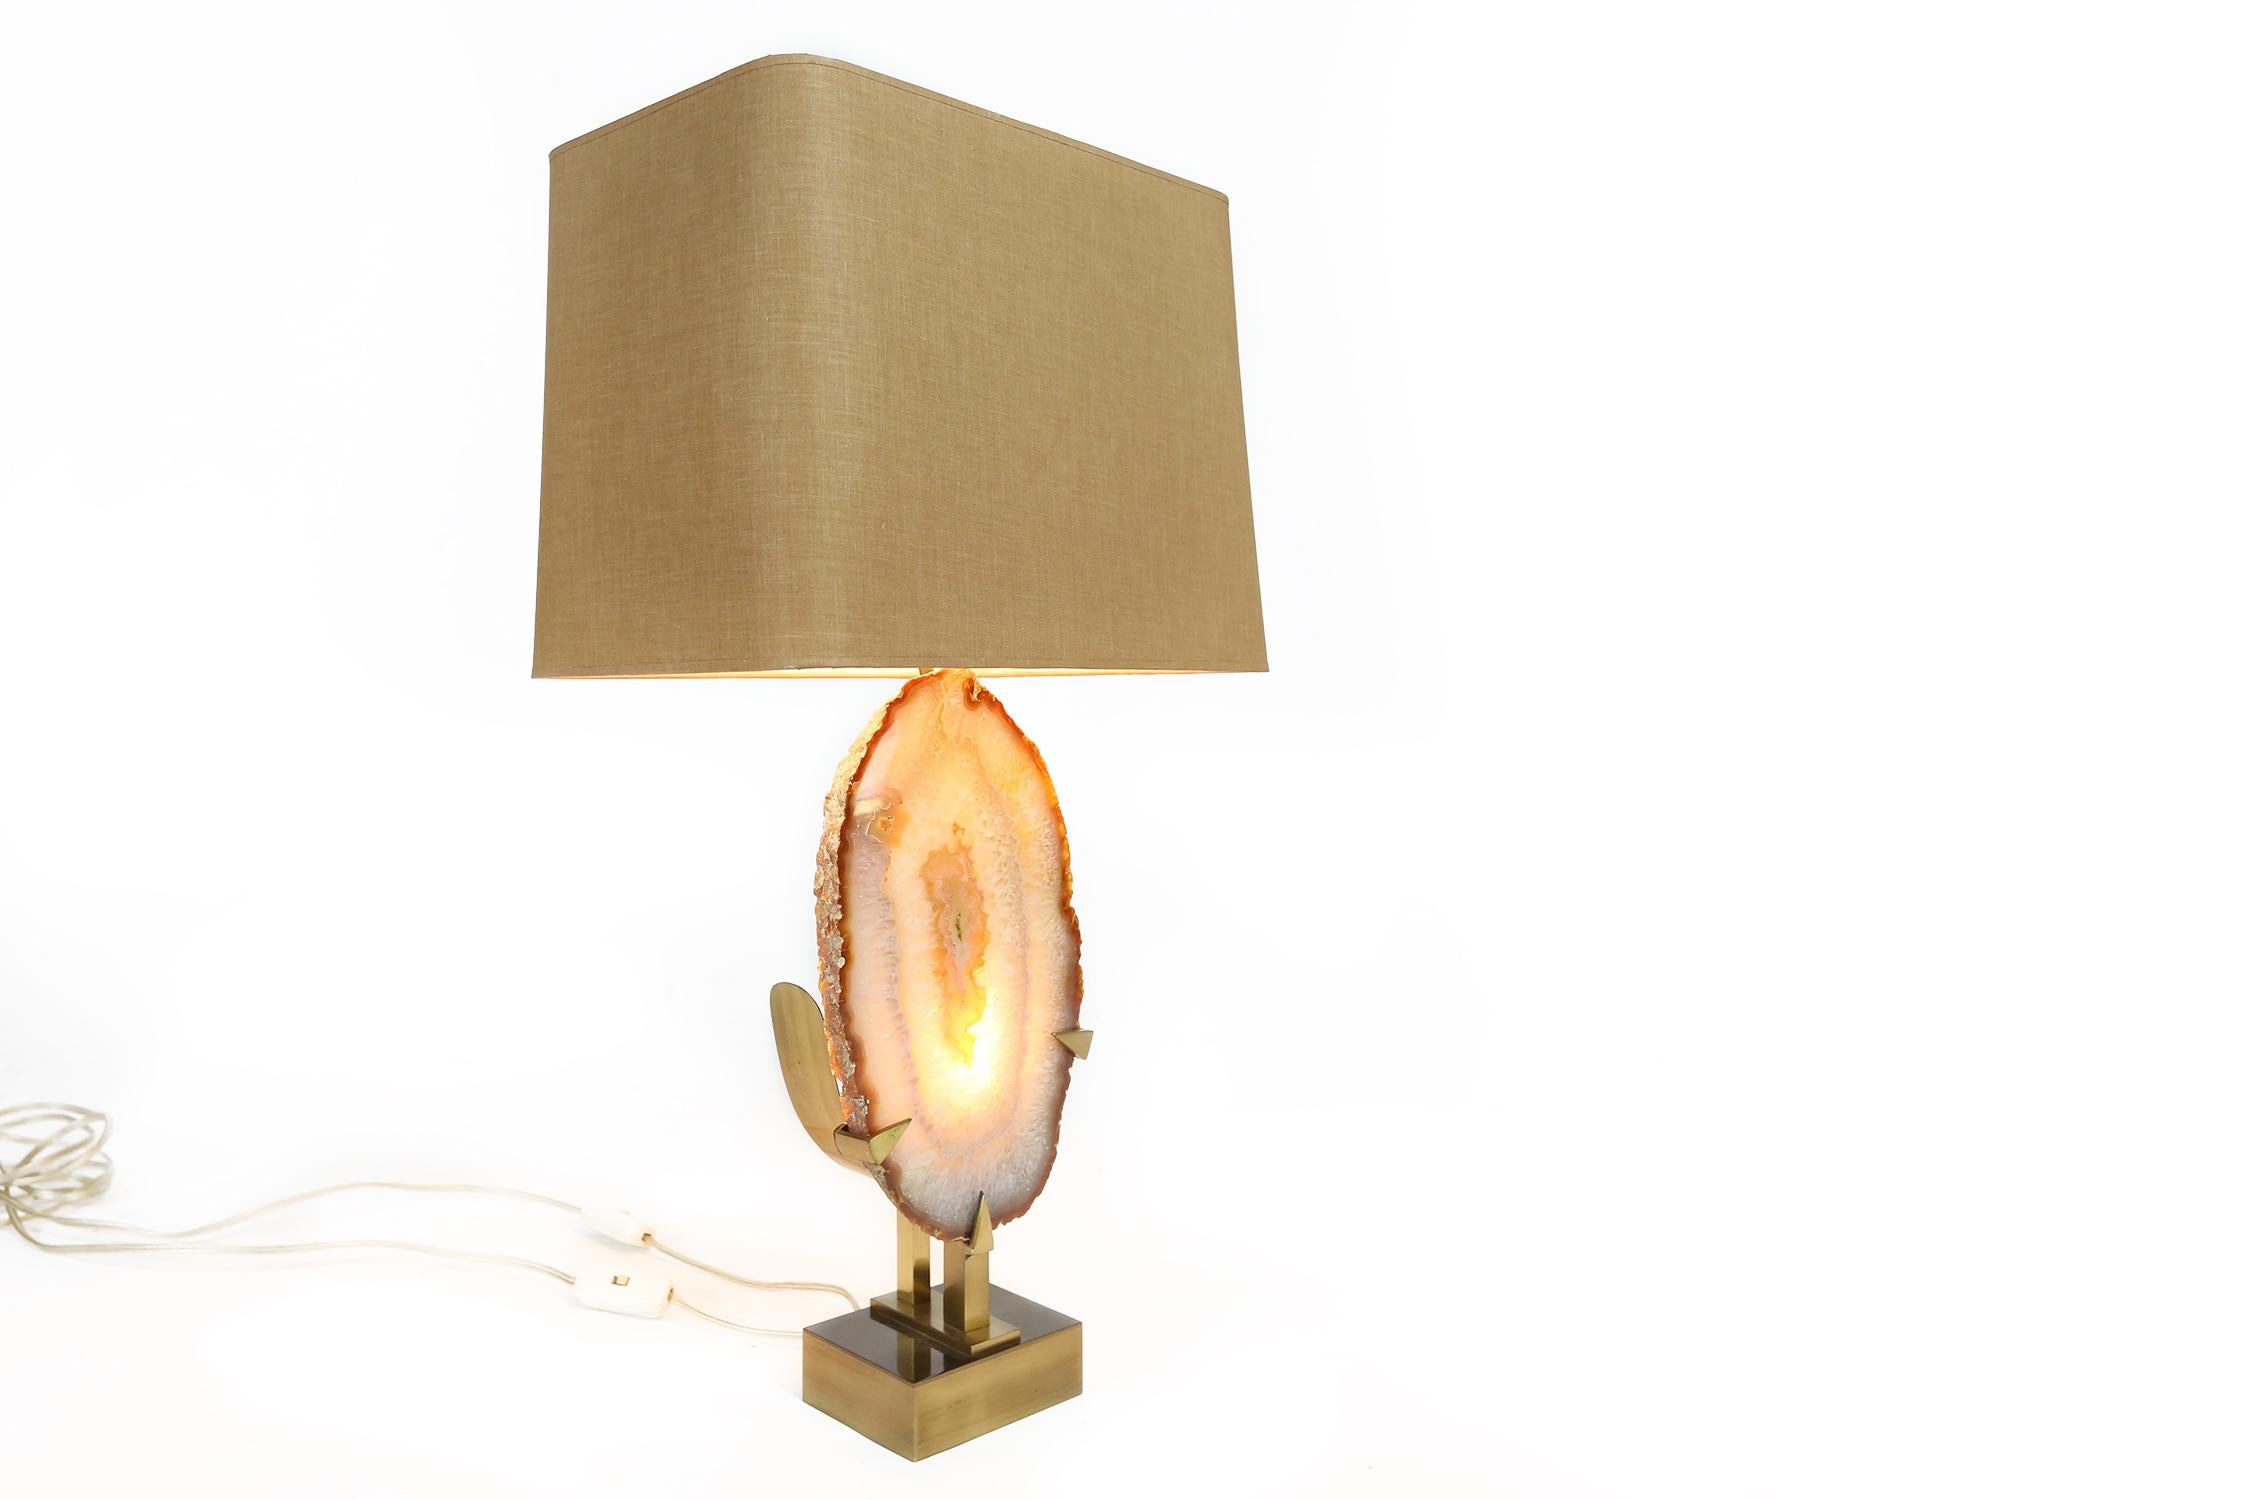 Willy Daro Large Bronze and Agate Table Lamp, 1970s (Belgisch)